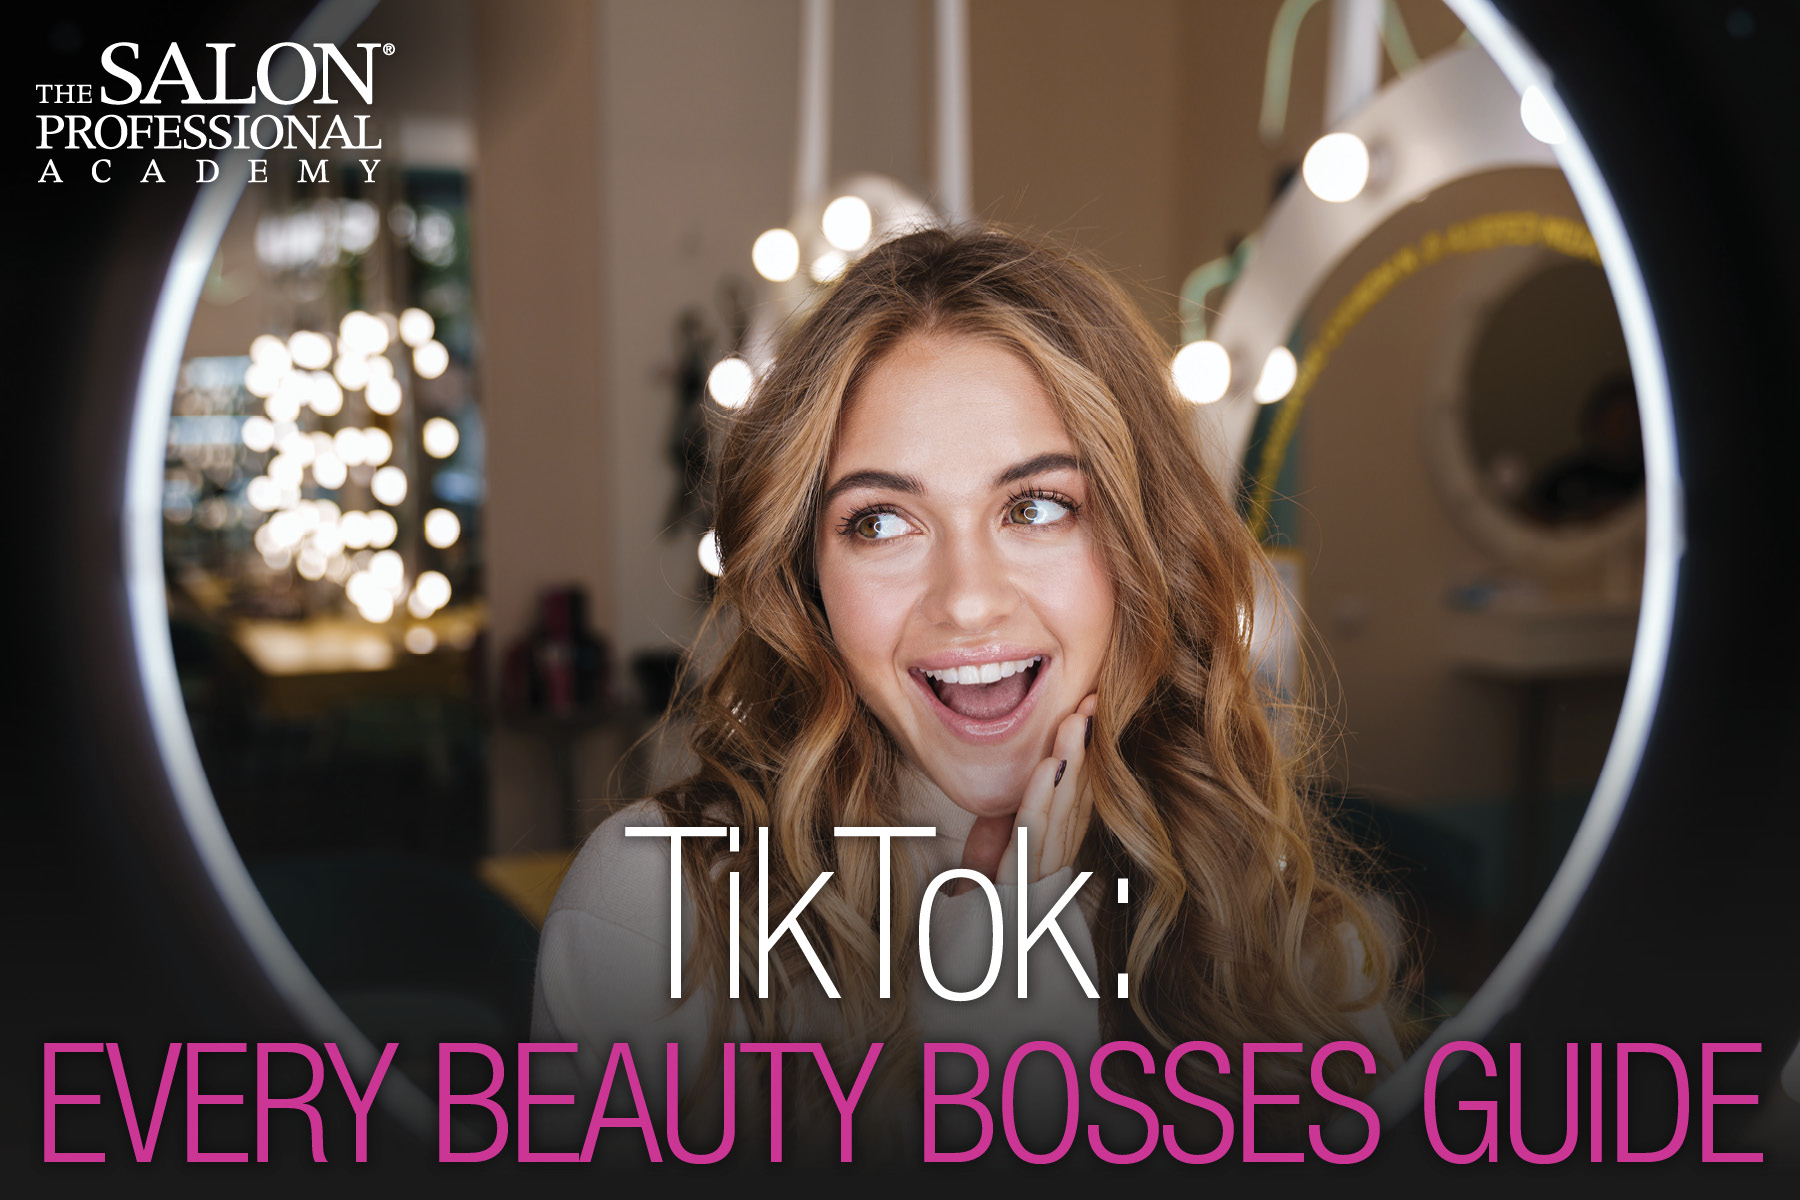 TikTok is a well-known social media app known for its beauty influencers. Learn more about it with 